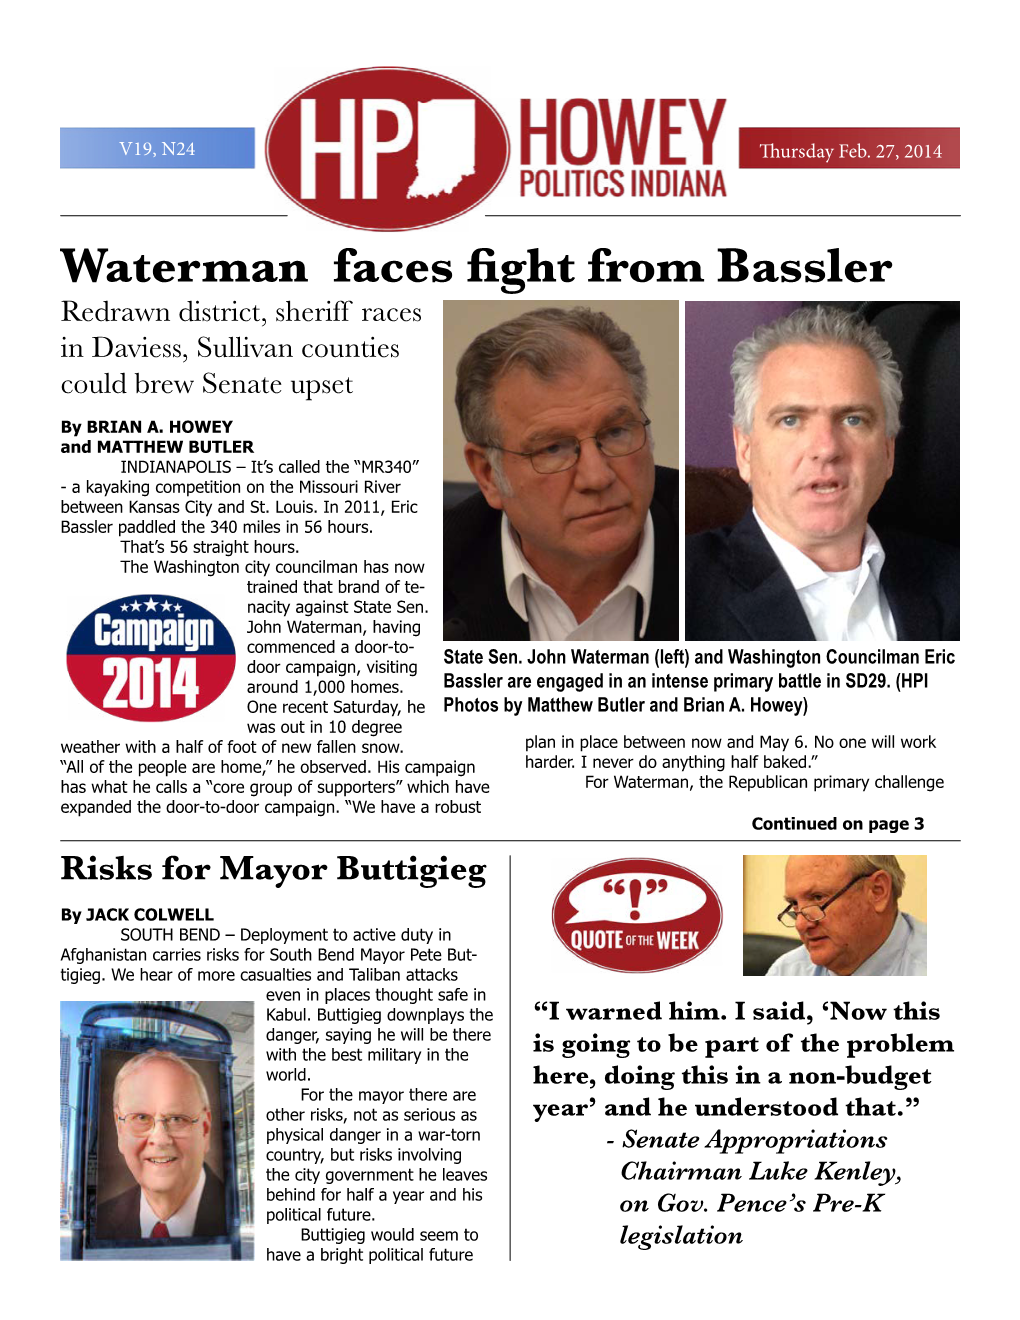 Waterman Faces Fight from Bassler Redrawn District, Sheriff Races in Daviess, Sullivan Counties Could Brew Senate Upset